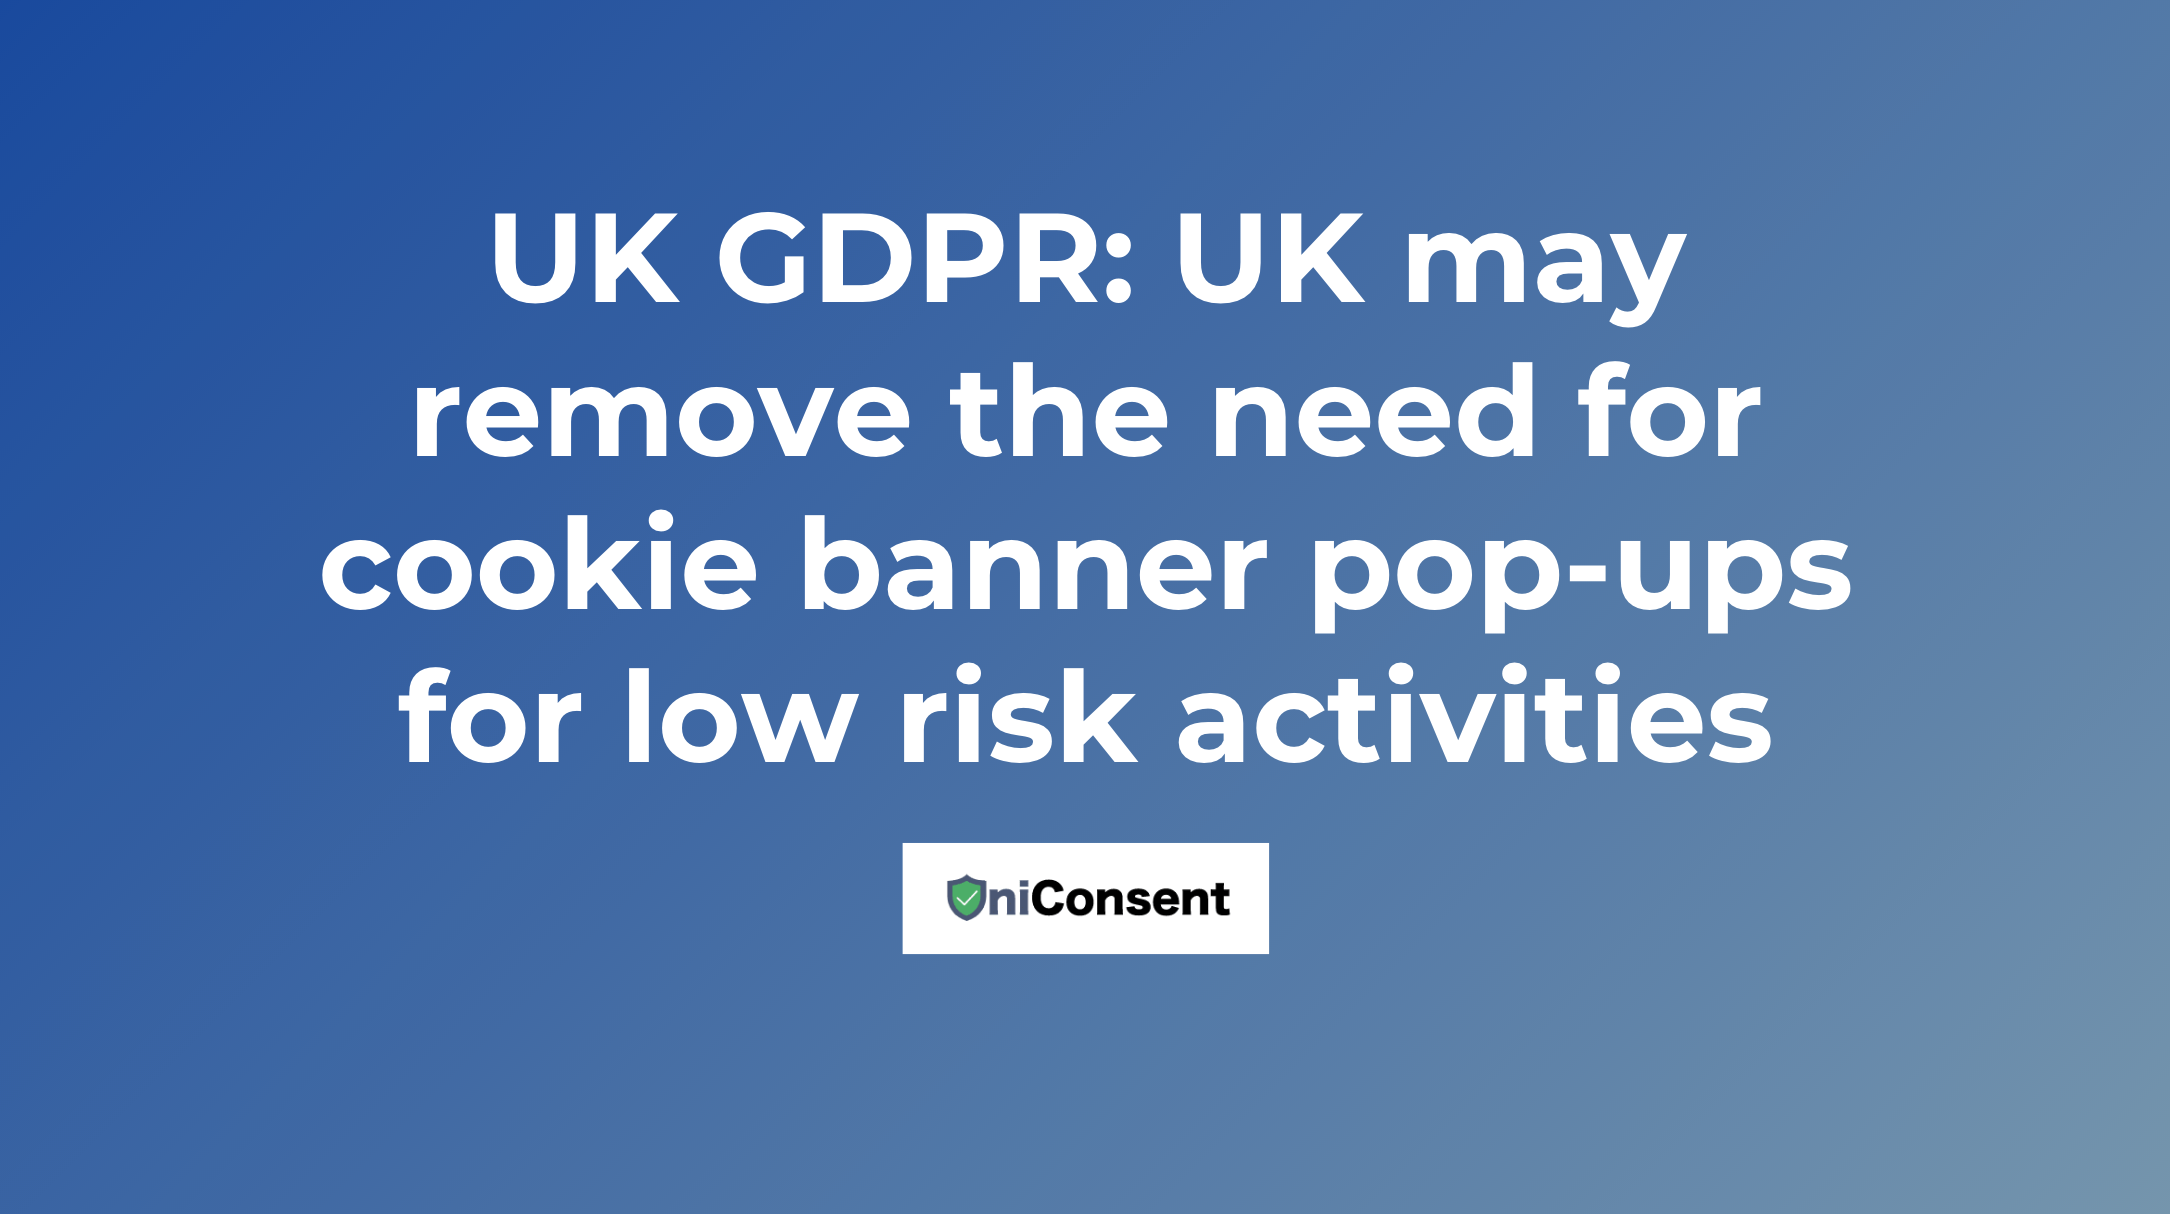 UK GDPR: UK may remove the need for cookie banner pop-ups for low risk activities